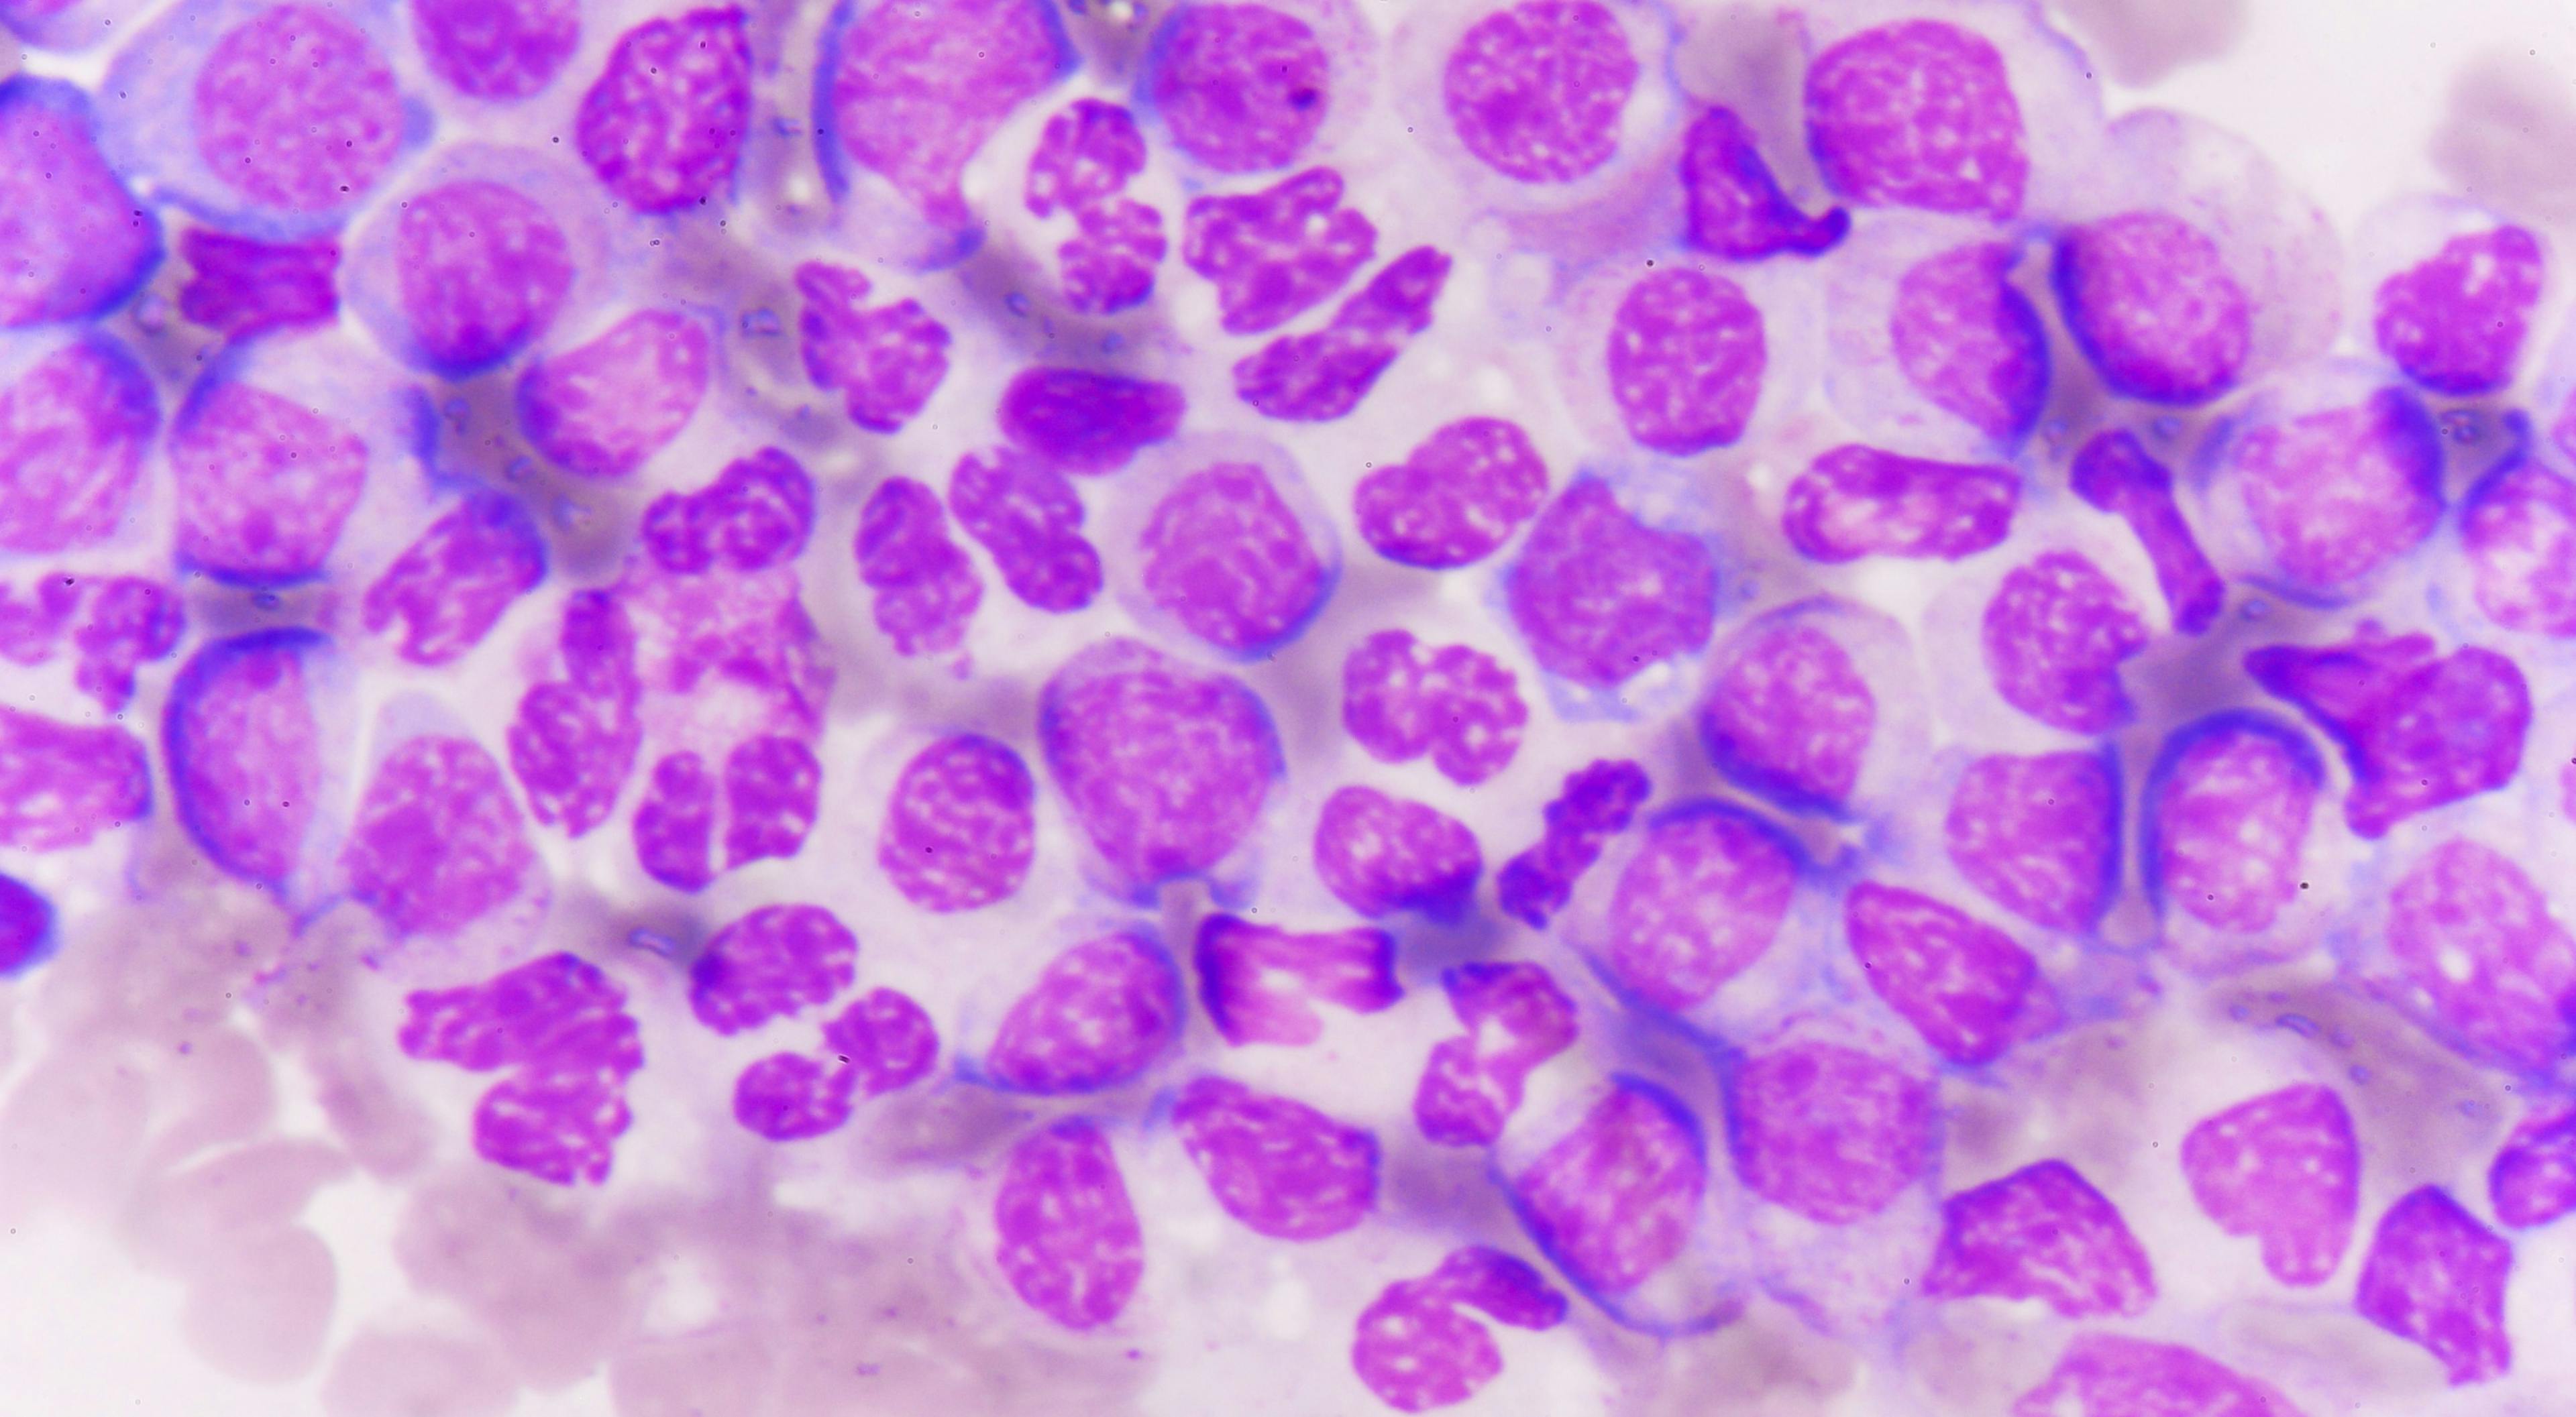 Encouraging Preliminary Results in Myelofibrosis Trial Lead to Enhancements in Phase 2